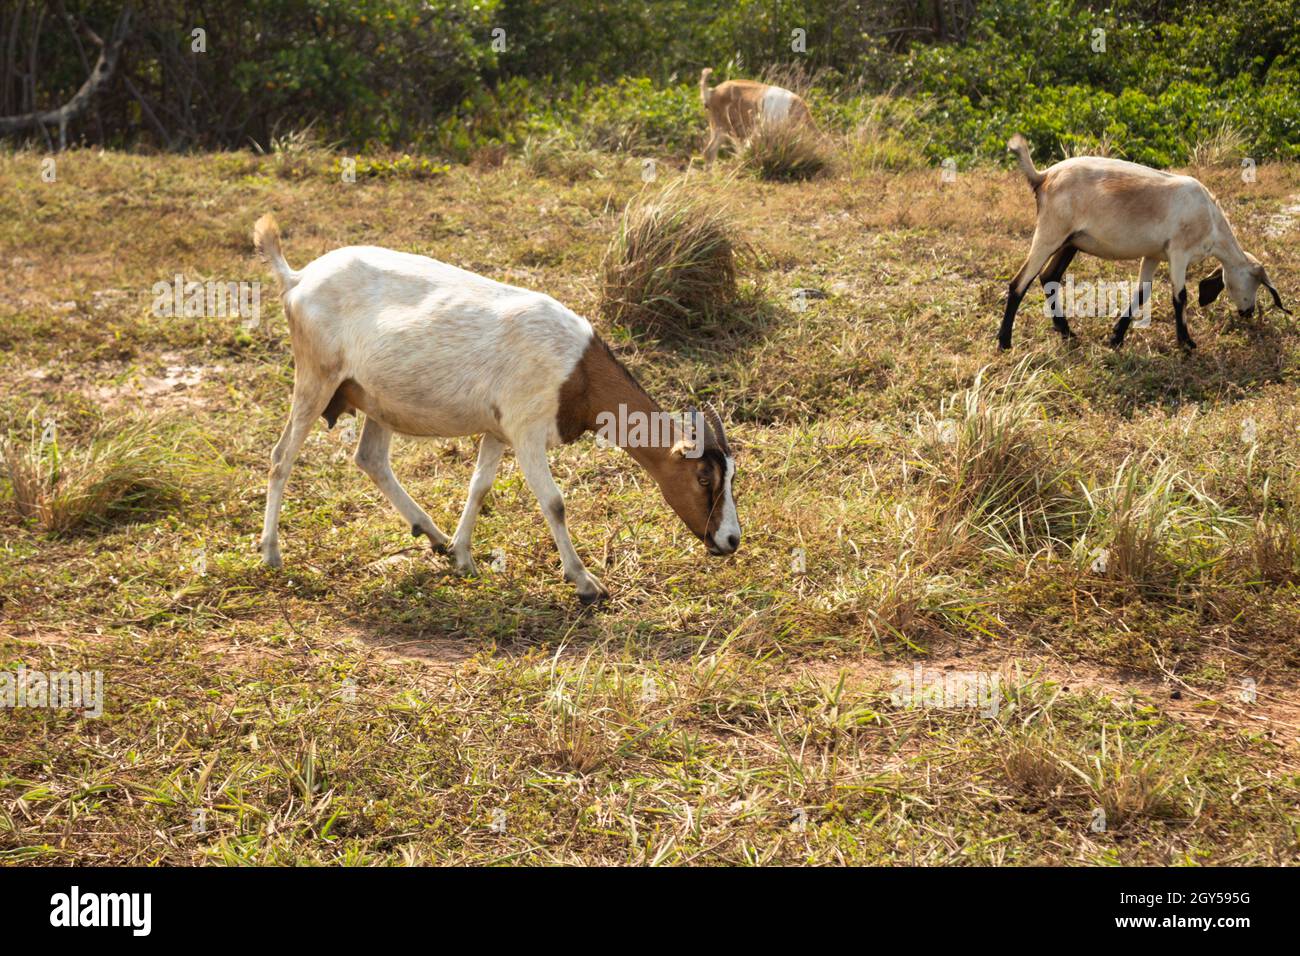 Beautiful horned goats eating in the field. White and brown animals free in nature. Live animals grazing. Stock Photo